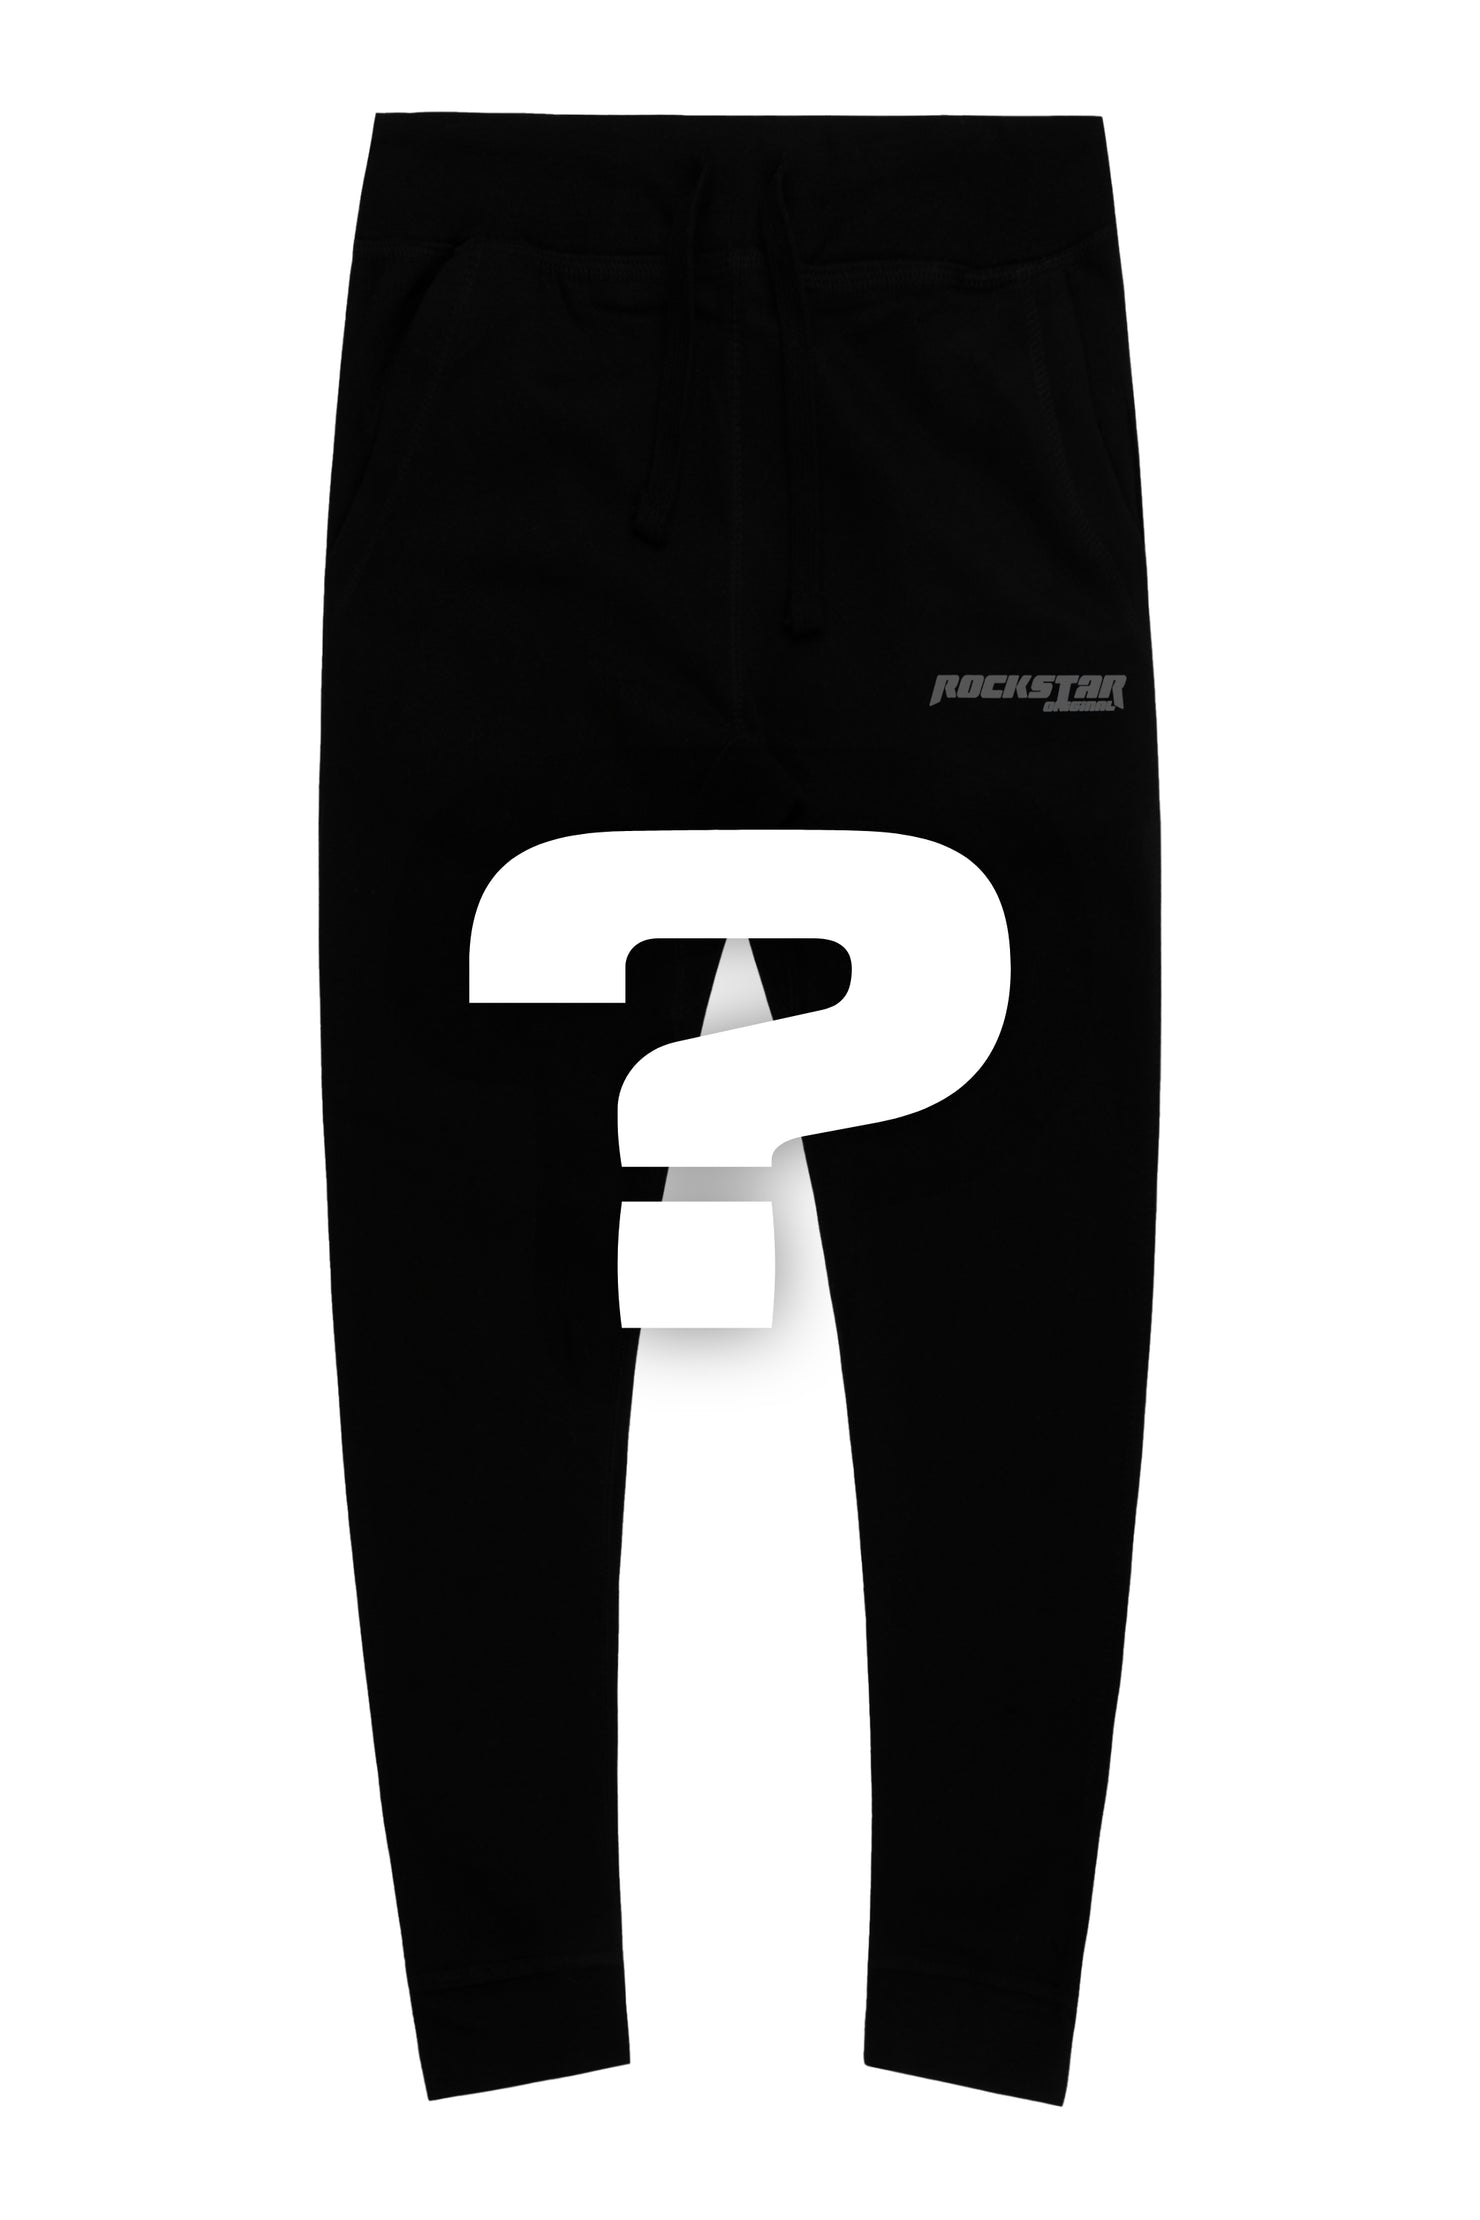 Rockstar joggers, Collection 2023